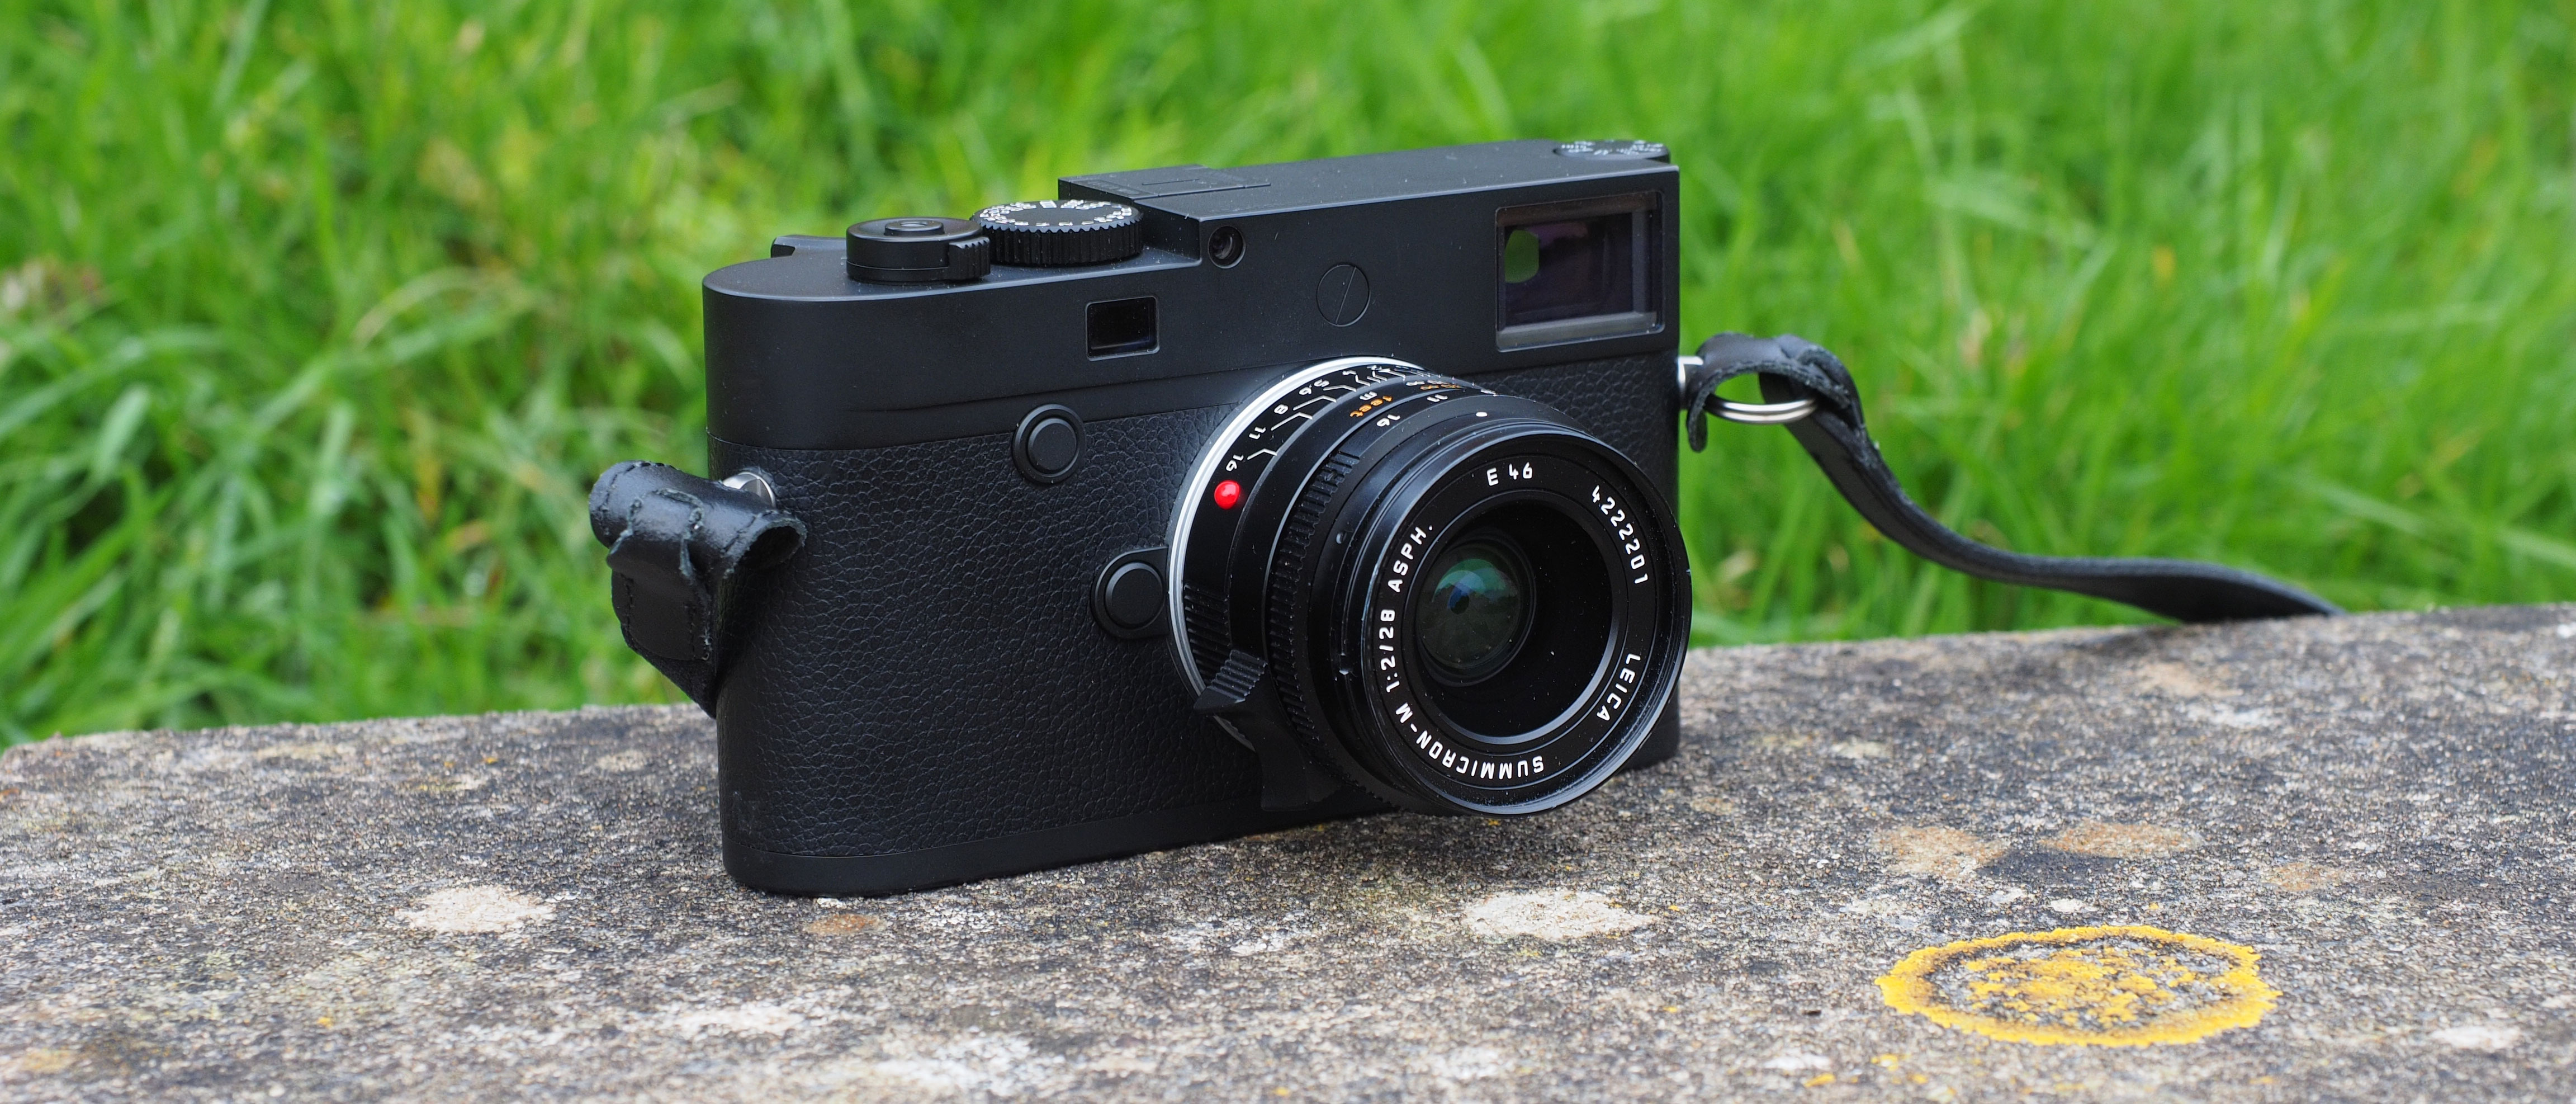 Review: Leica M10 (The Smallest Digital M Series Camera Made)